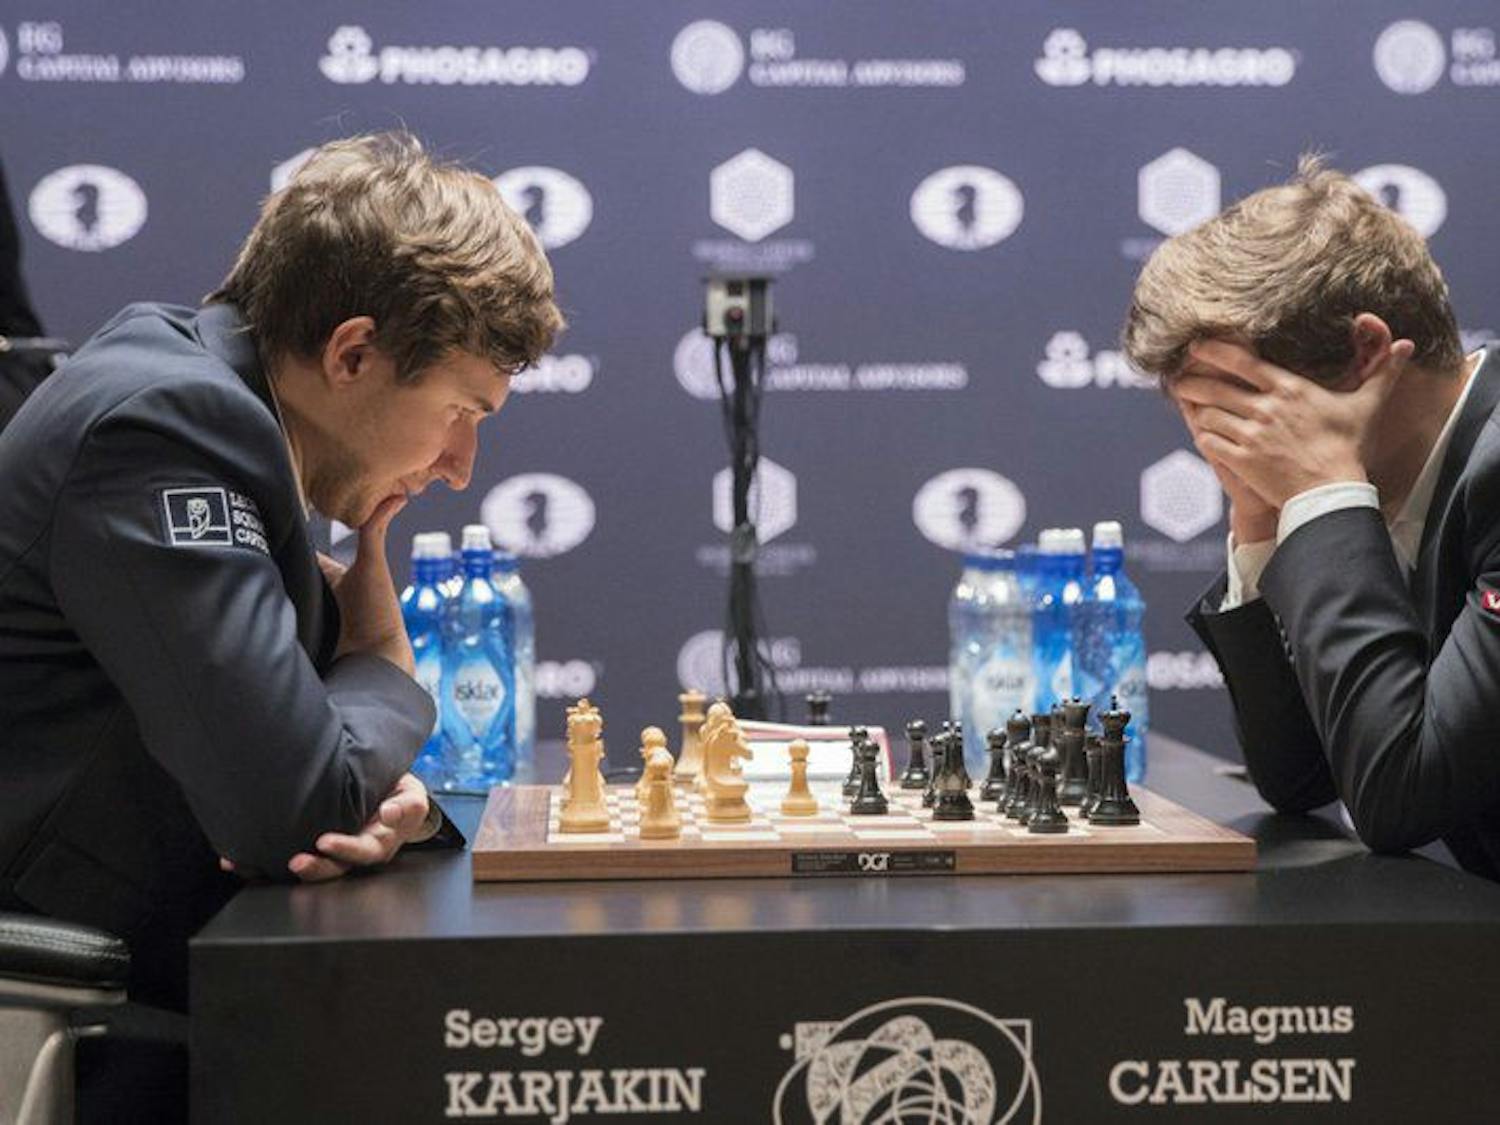 Is chess a sport? What about video gaming? Competitive eating?